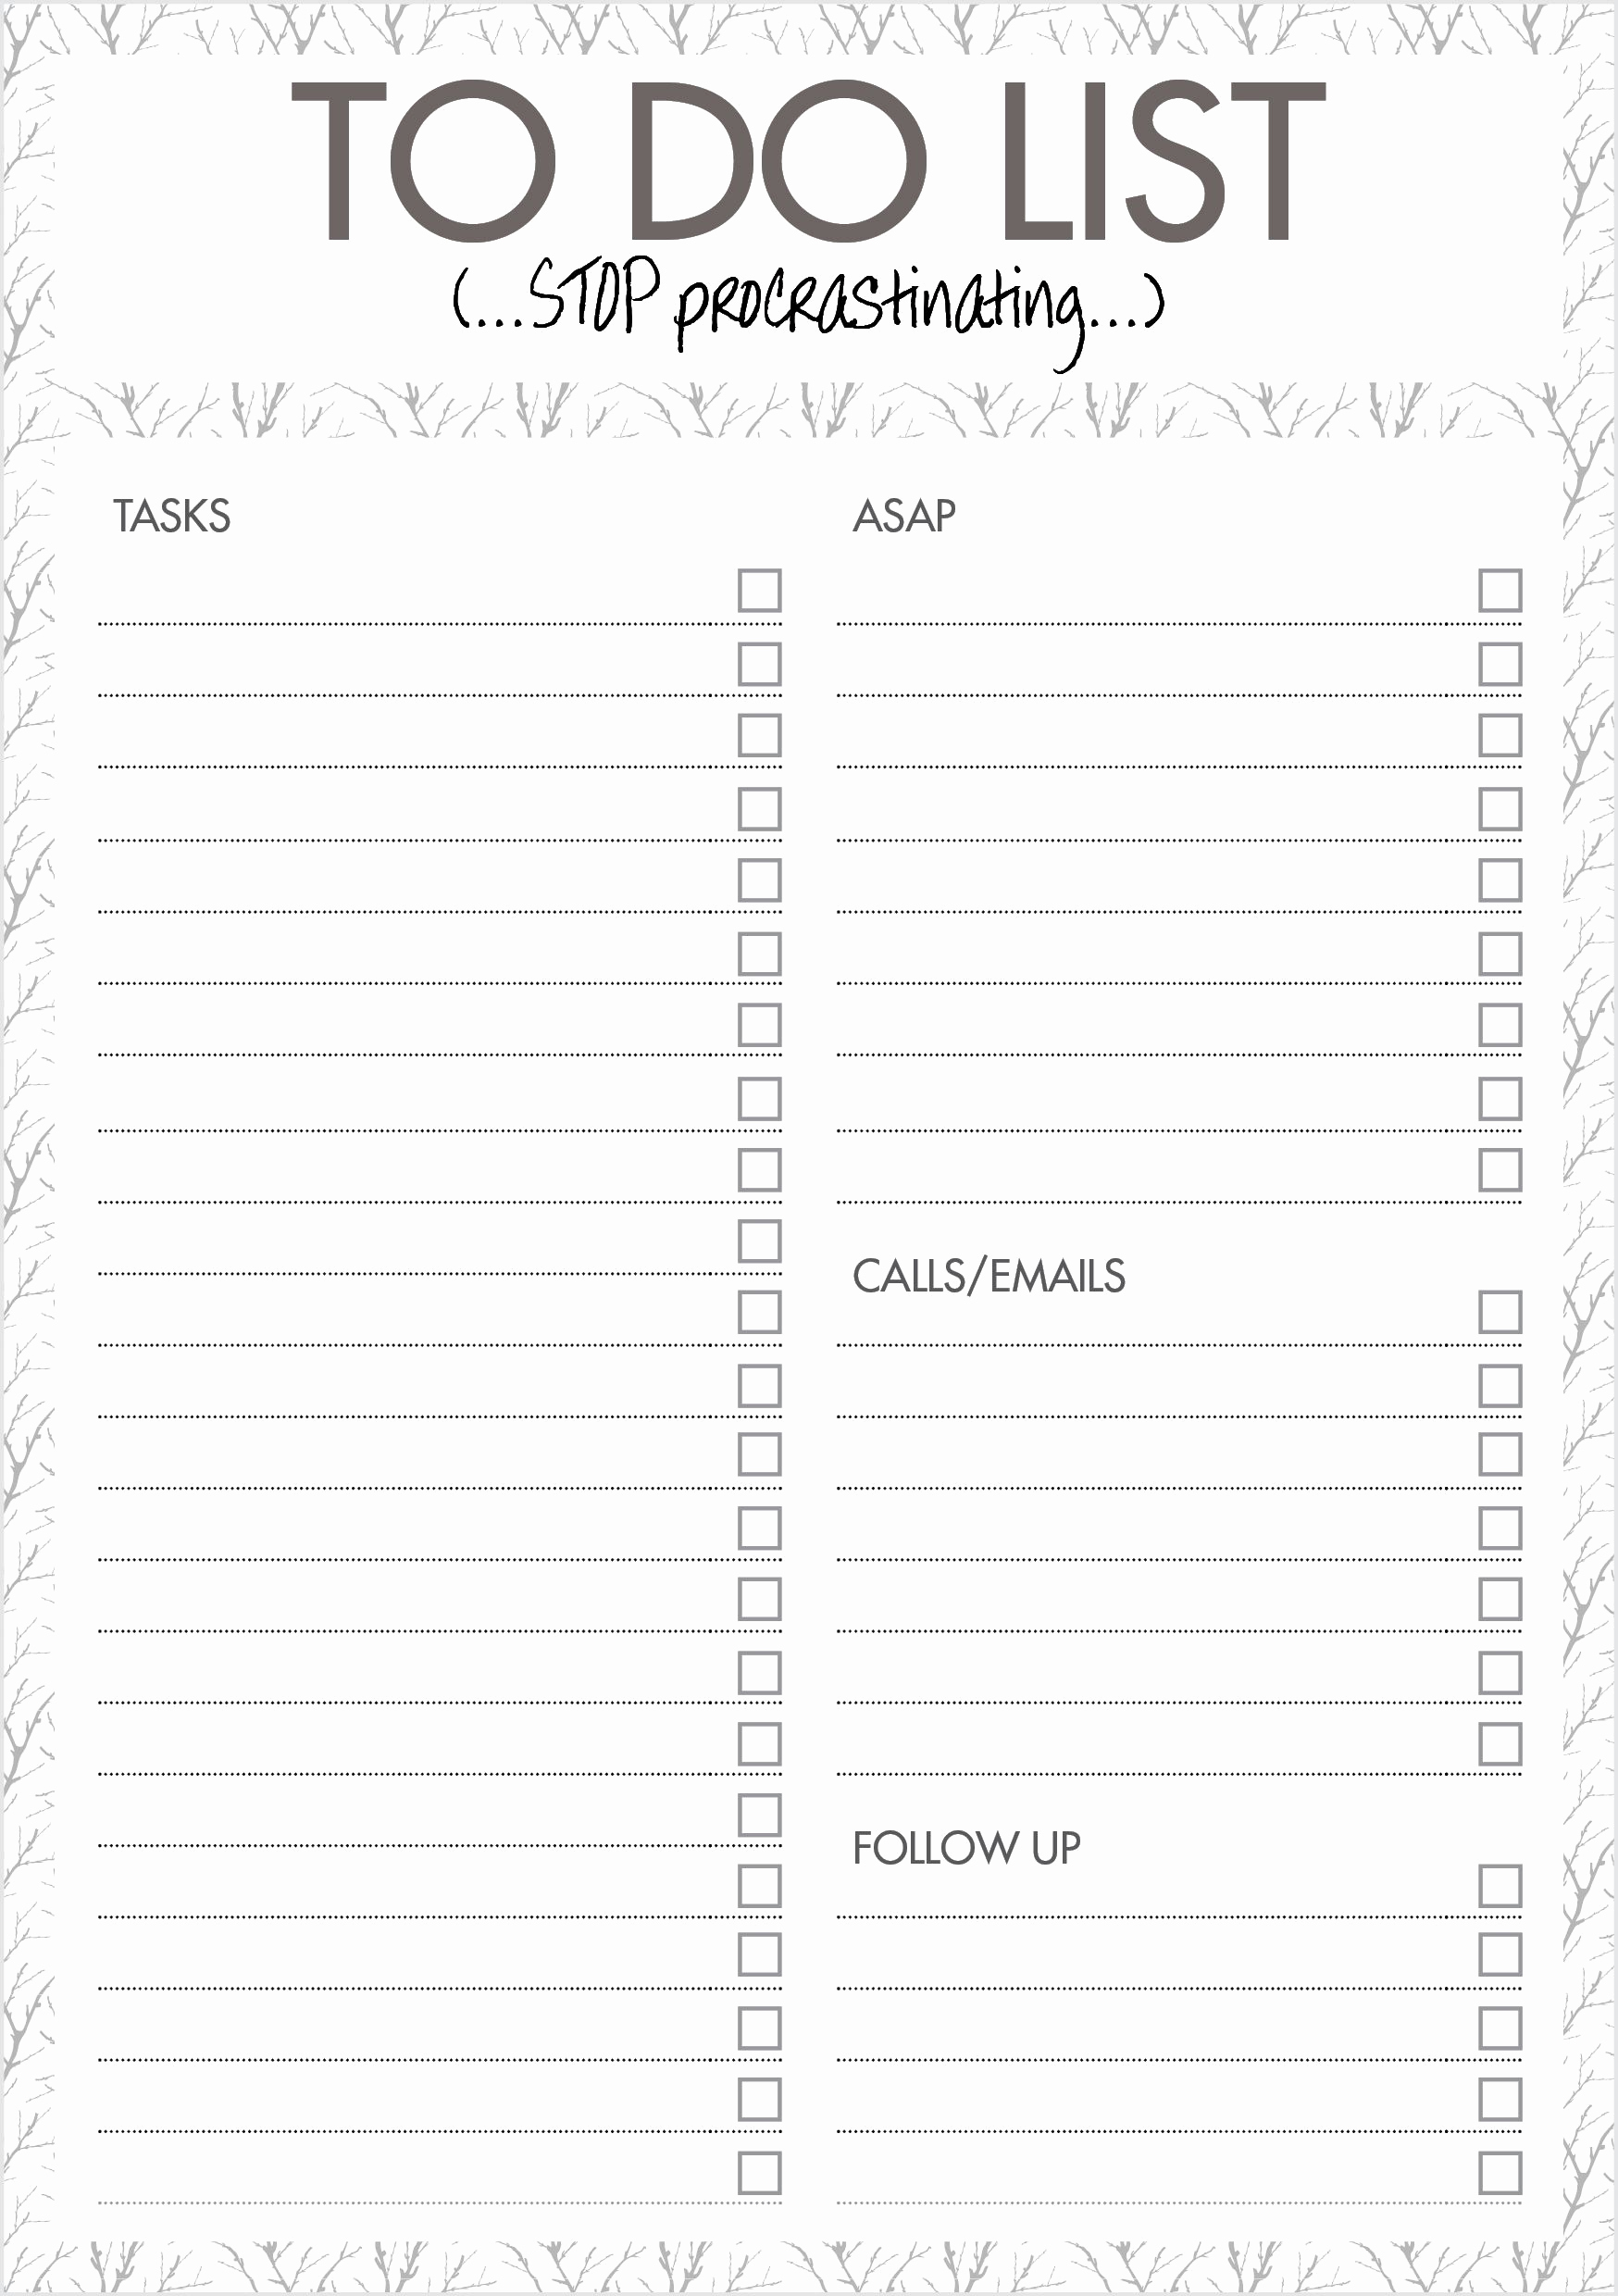 Things to Do List Template Fresh organization Templates On Pinterest